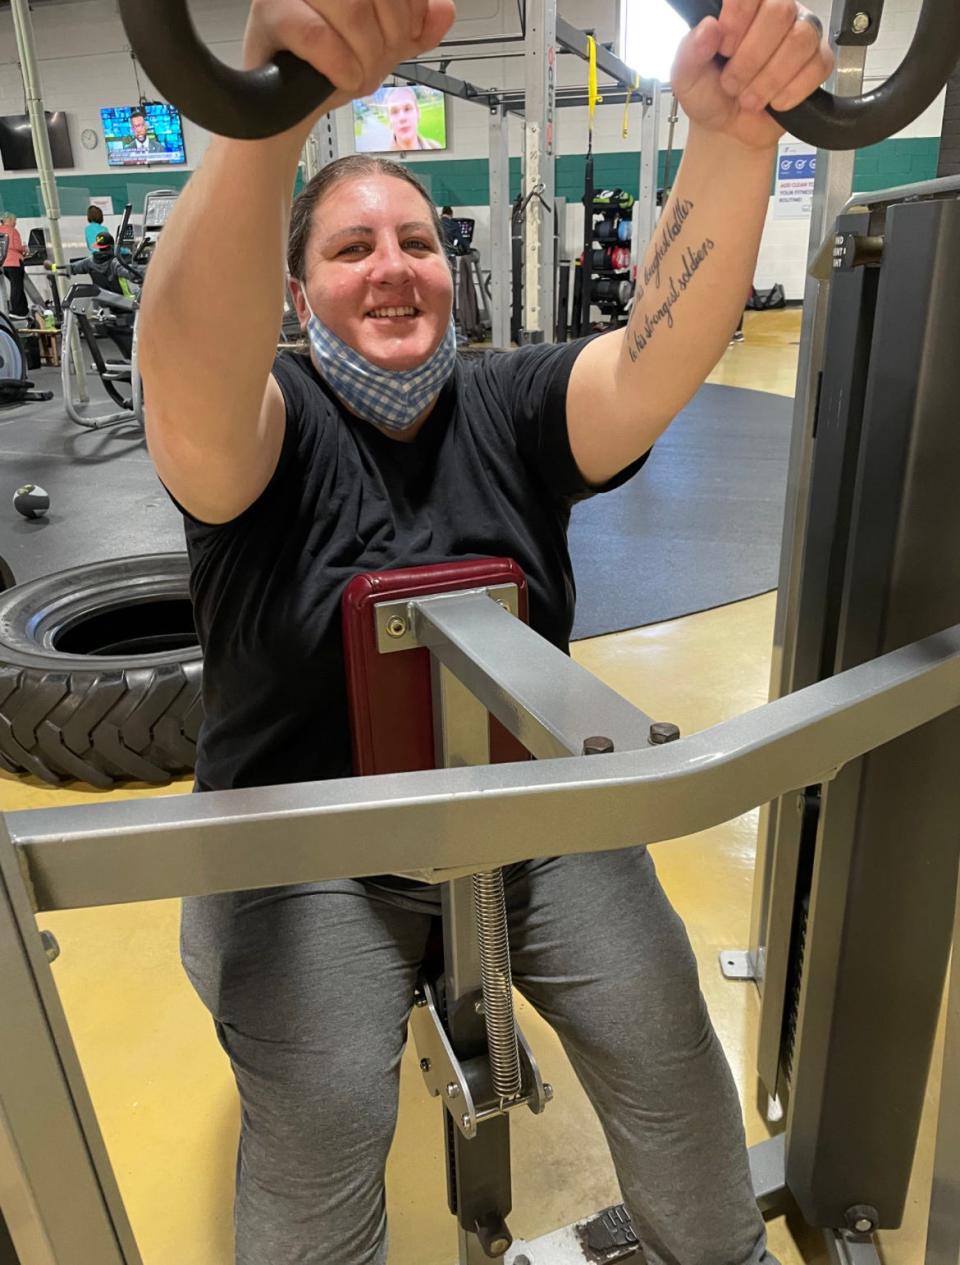 Cancer survivor Angela Gross completes arm exercises during an Old Colony YMCA Livestrong program